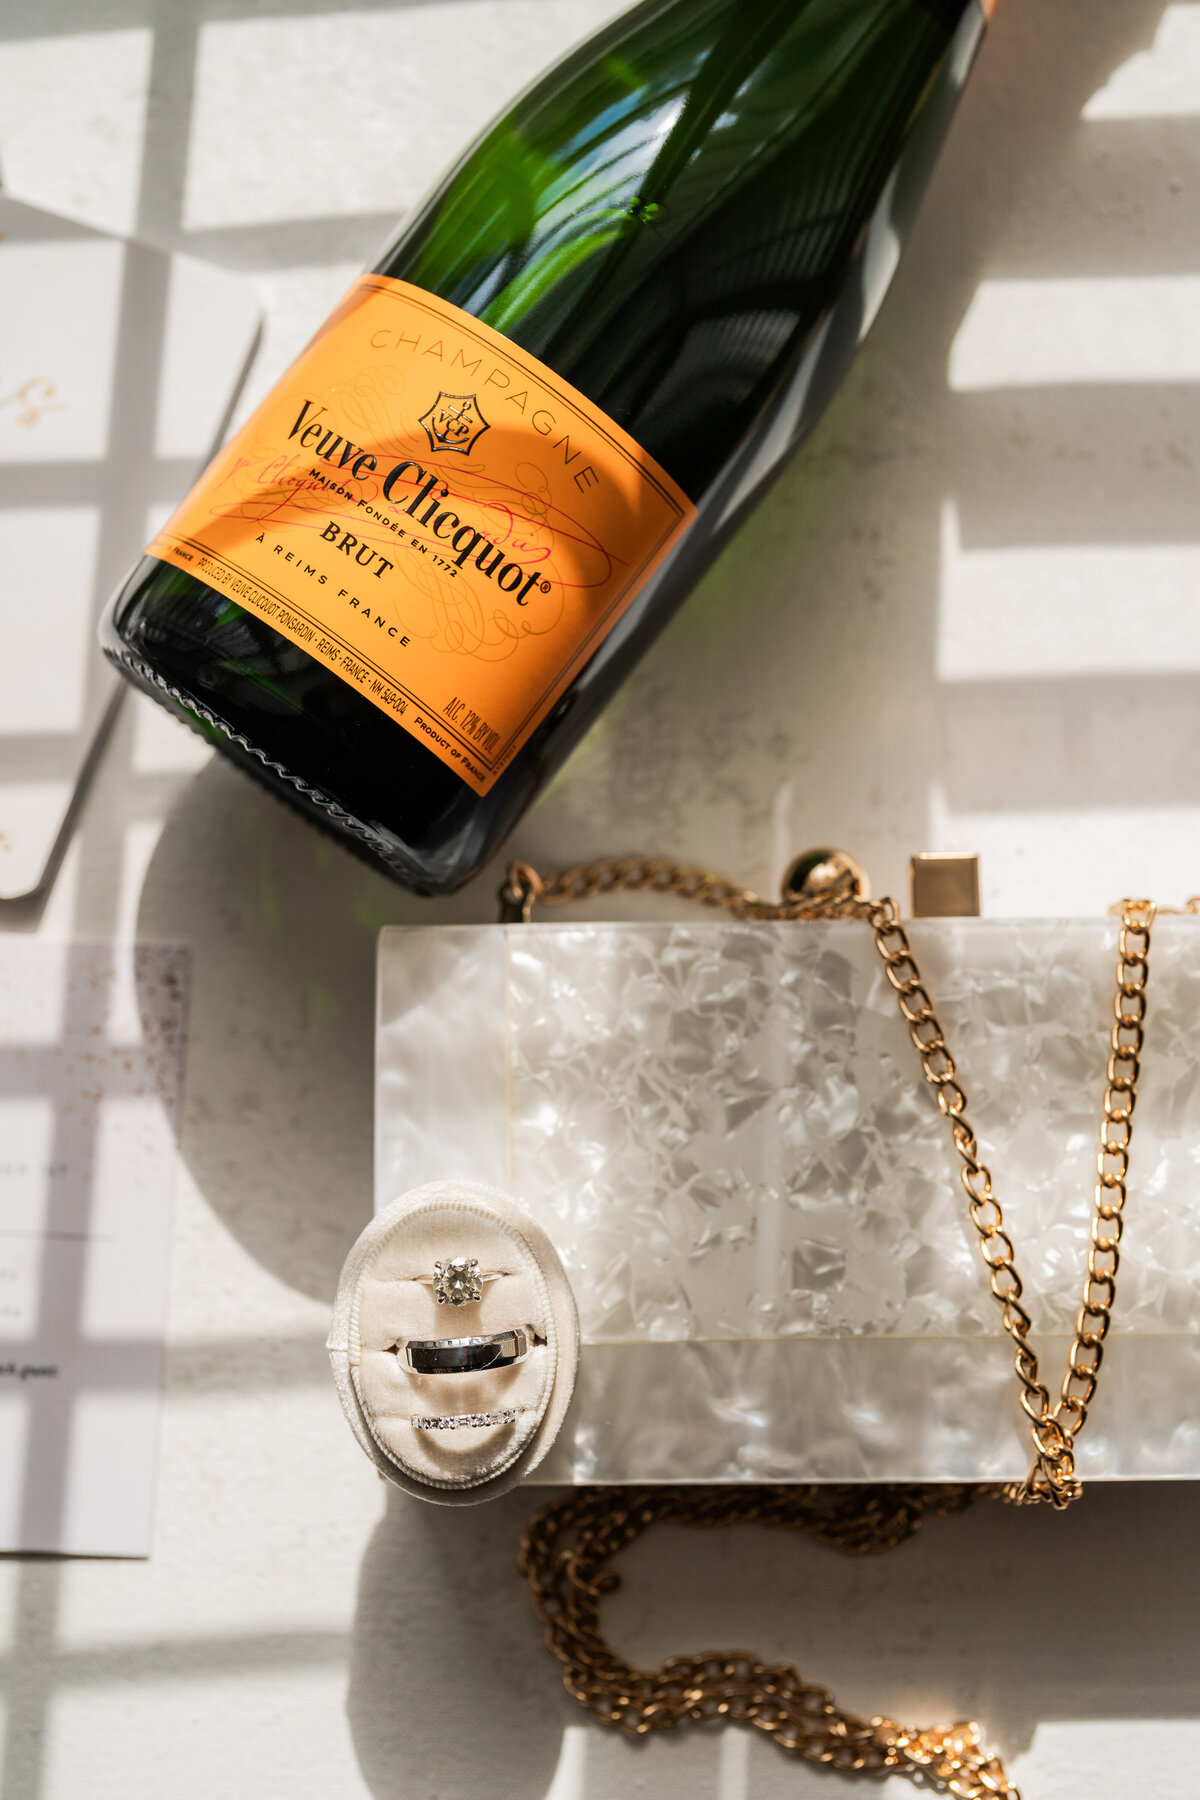 Photo of brides wedding details including rings purse and veuve clicquot champagne bottle